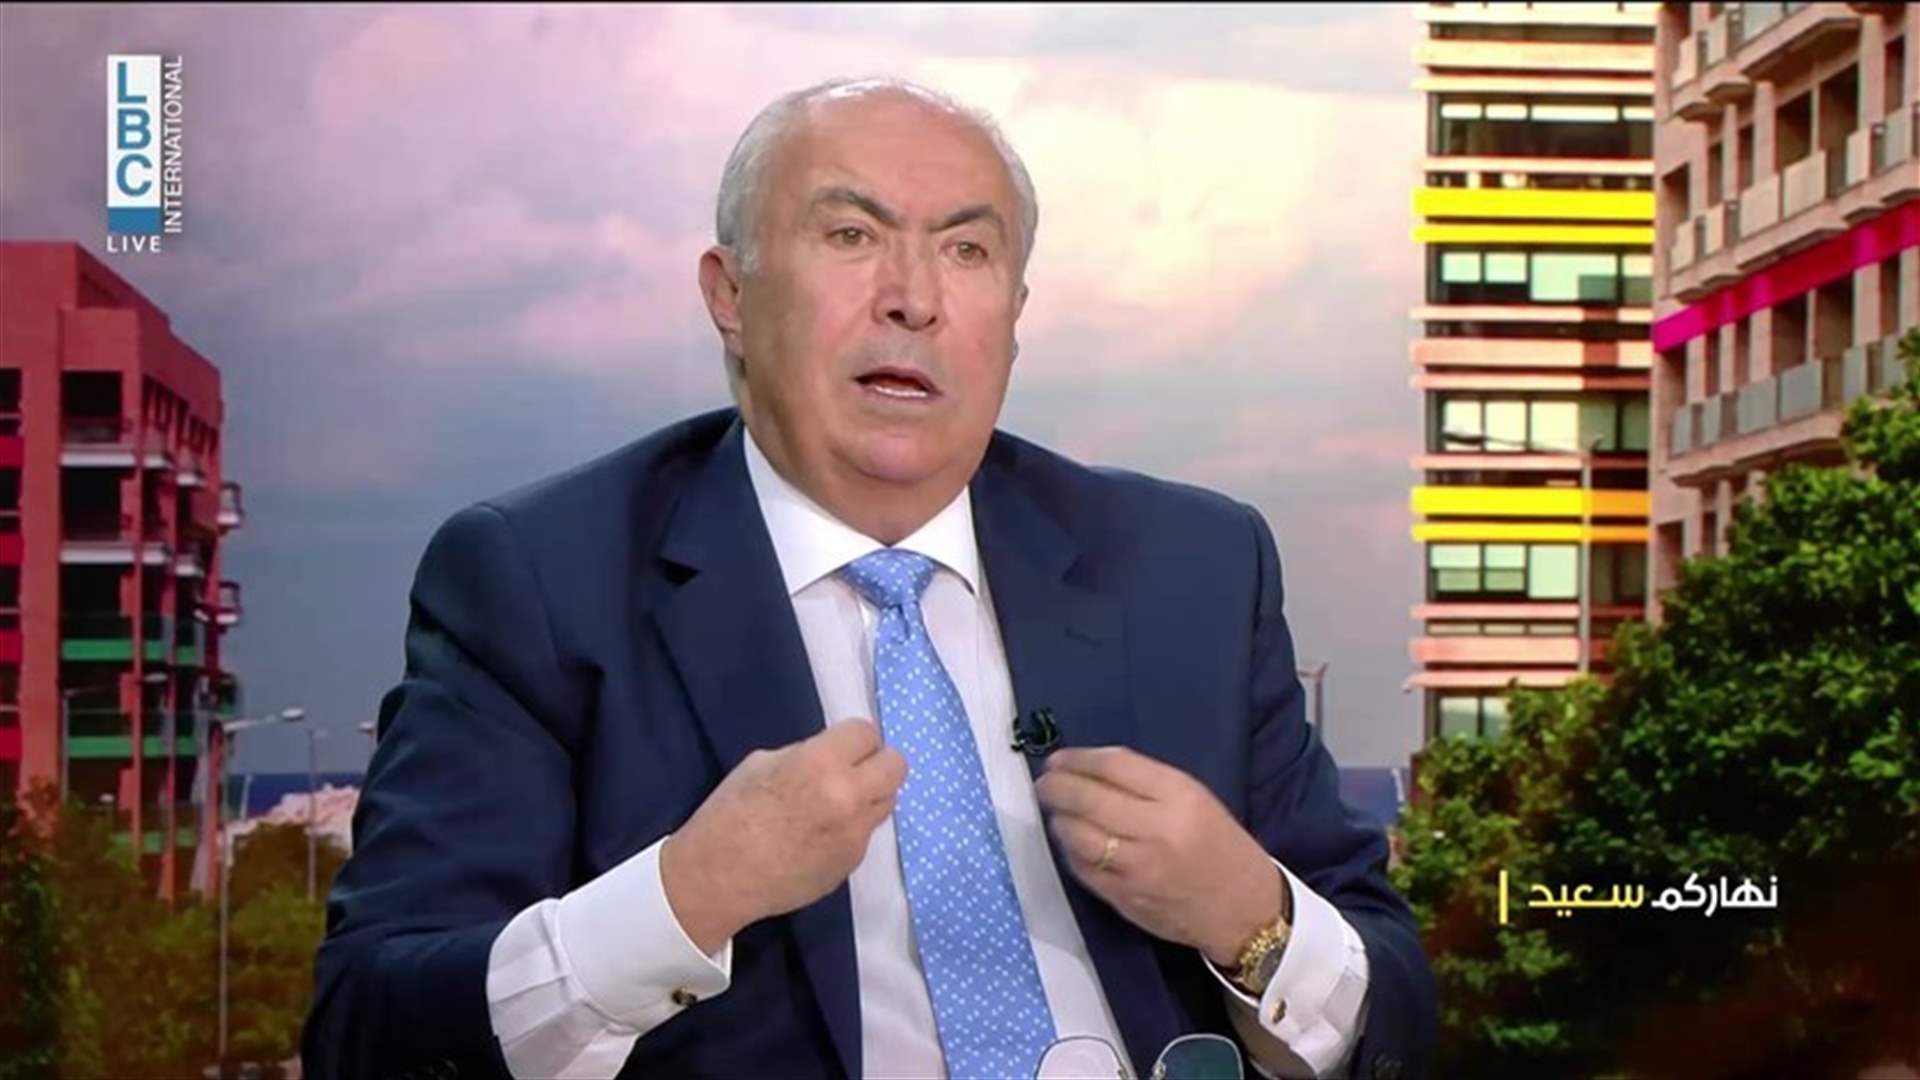 MP Makhzoumi to LBCI: Row with Hezbollah is not limited to Saudi Arabia